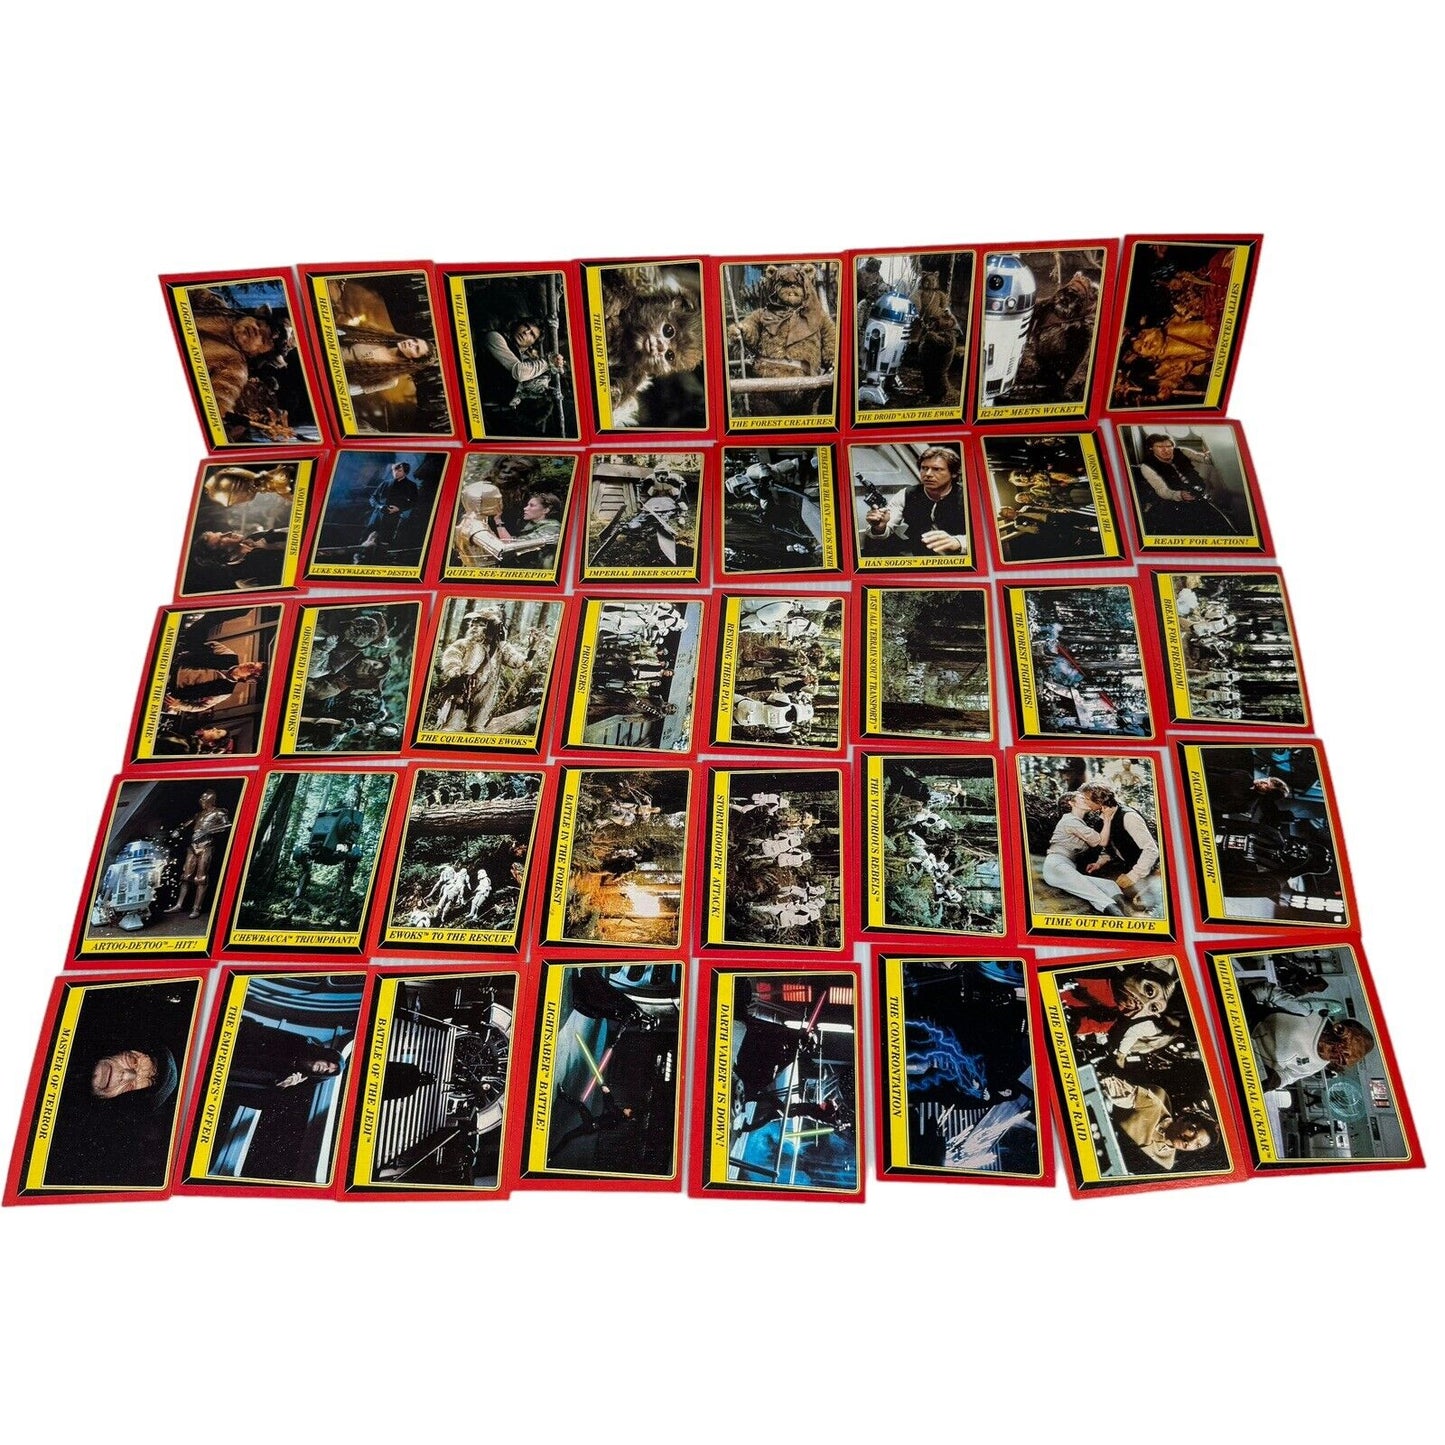 1983 Topps Return of the Jedi trading cards NEAR complete set Missing 3, 4, 132